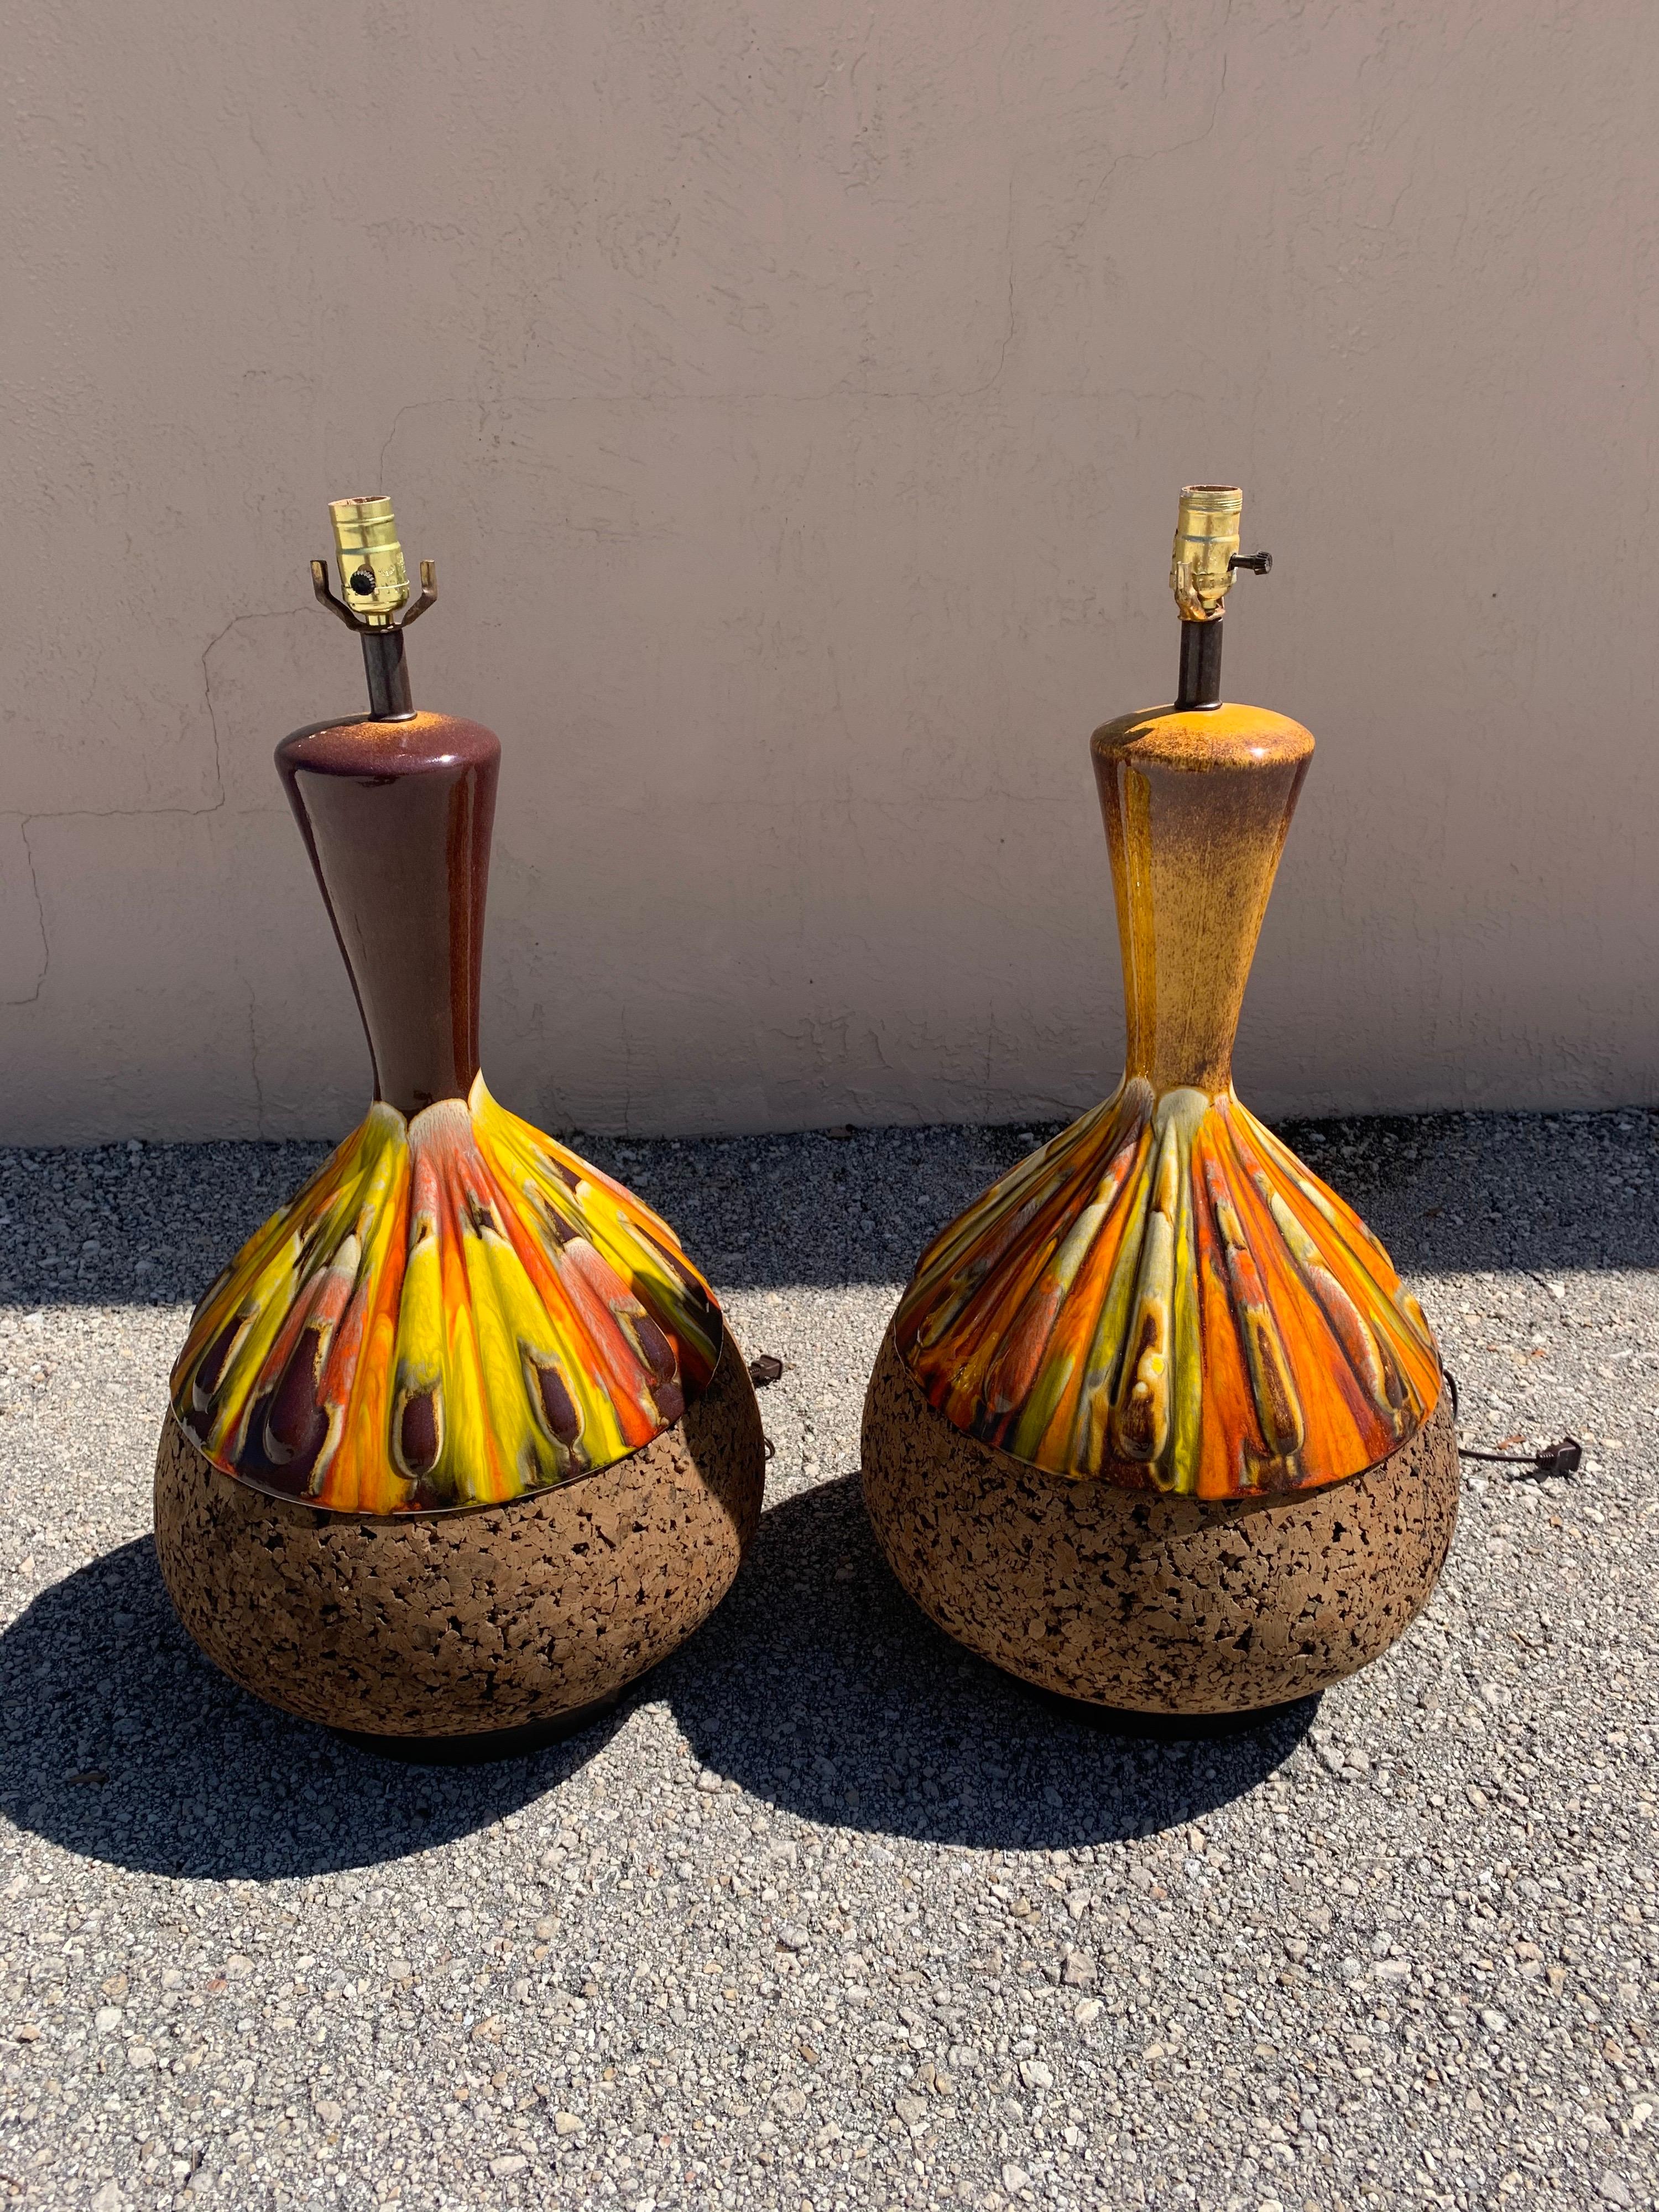 Stellar pair of Mid-Century Modern table lamps in cork and teak. In pristine condition. Gorgeous browns, yellows, and oranges swirling in the ceramic.